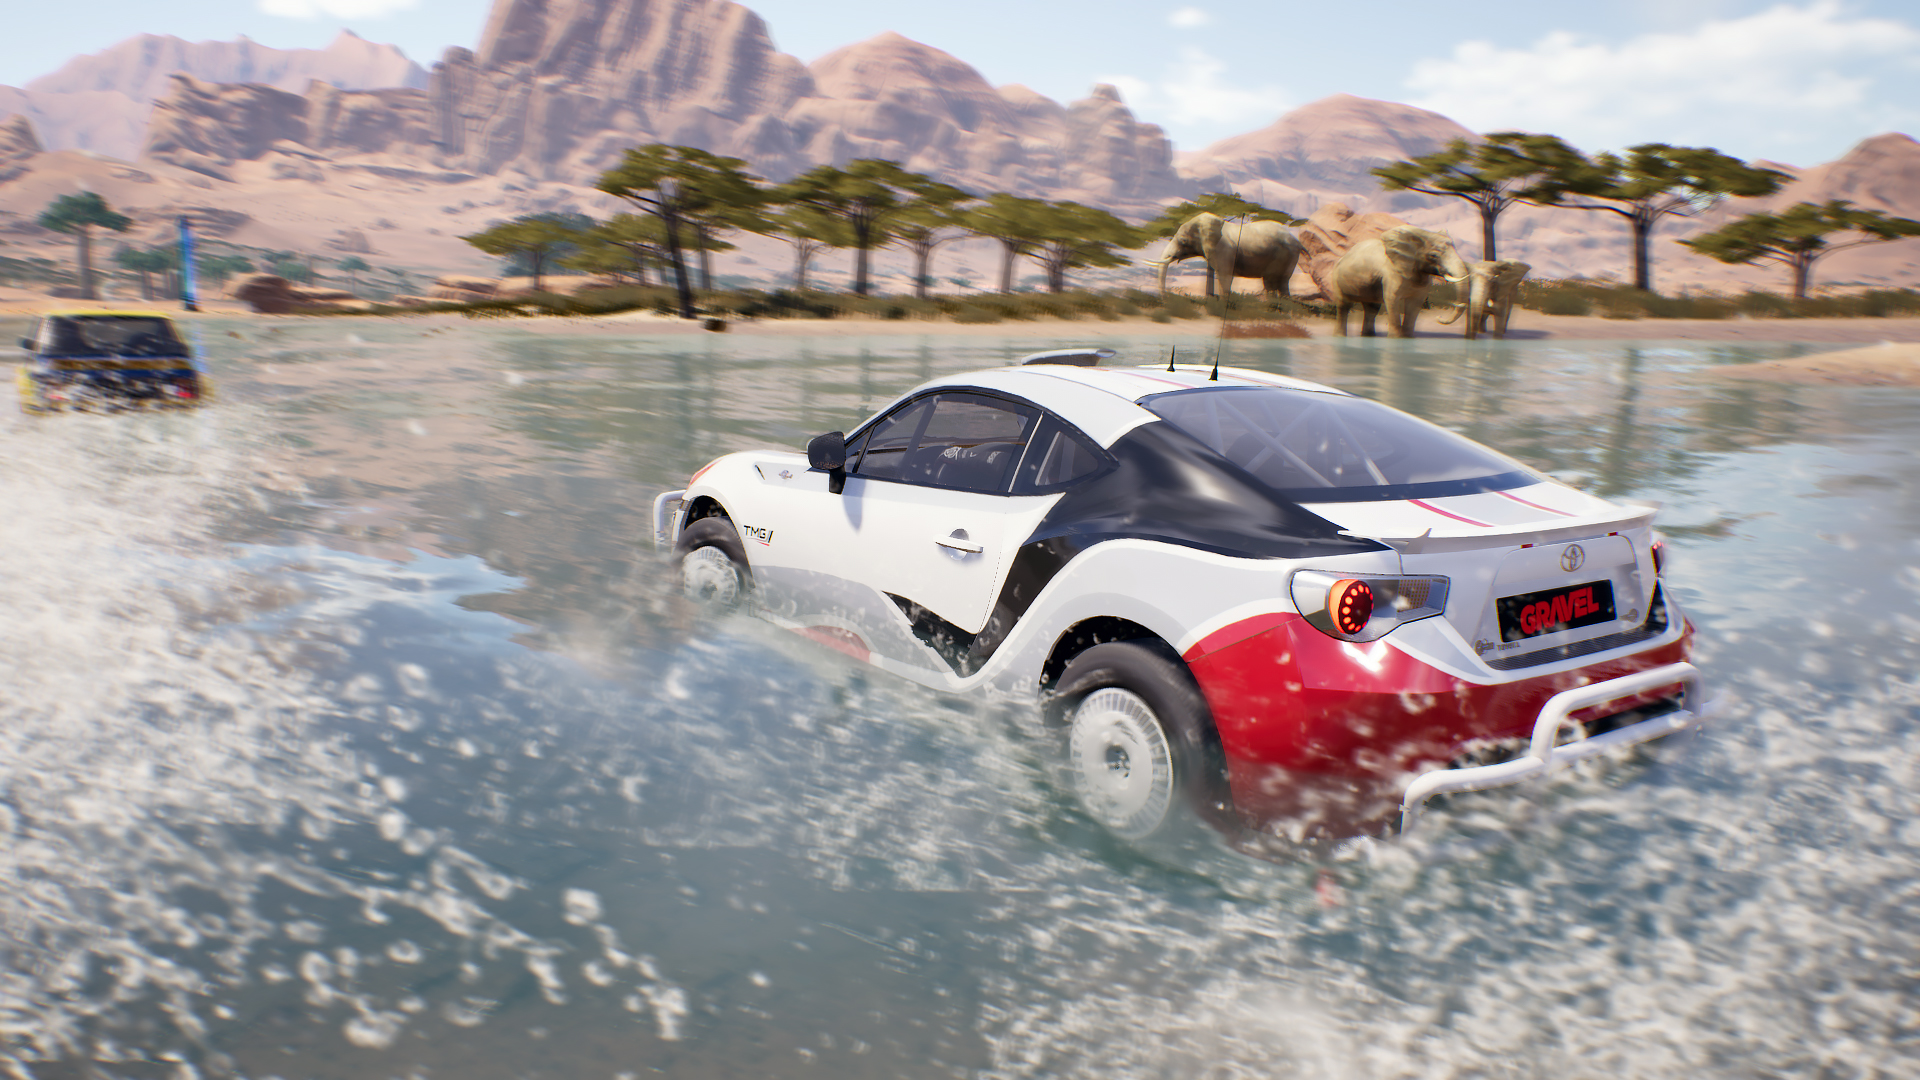 Experience the Off-road Extreme Driving of Gravel on Xbox One